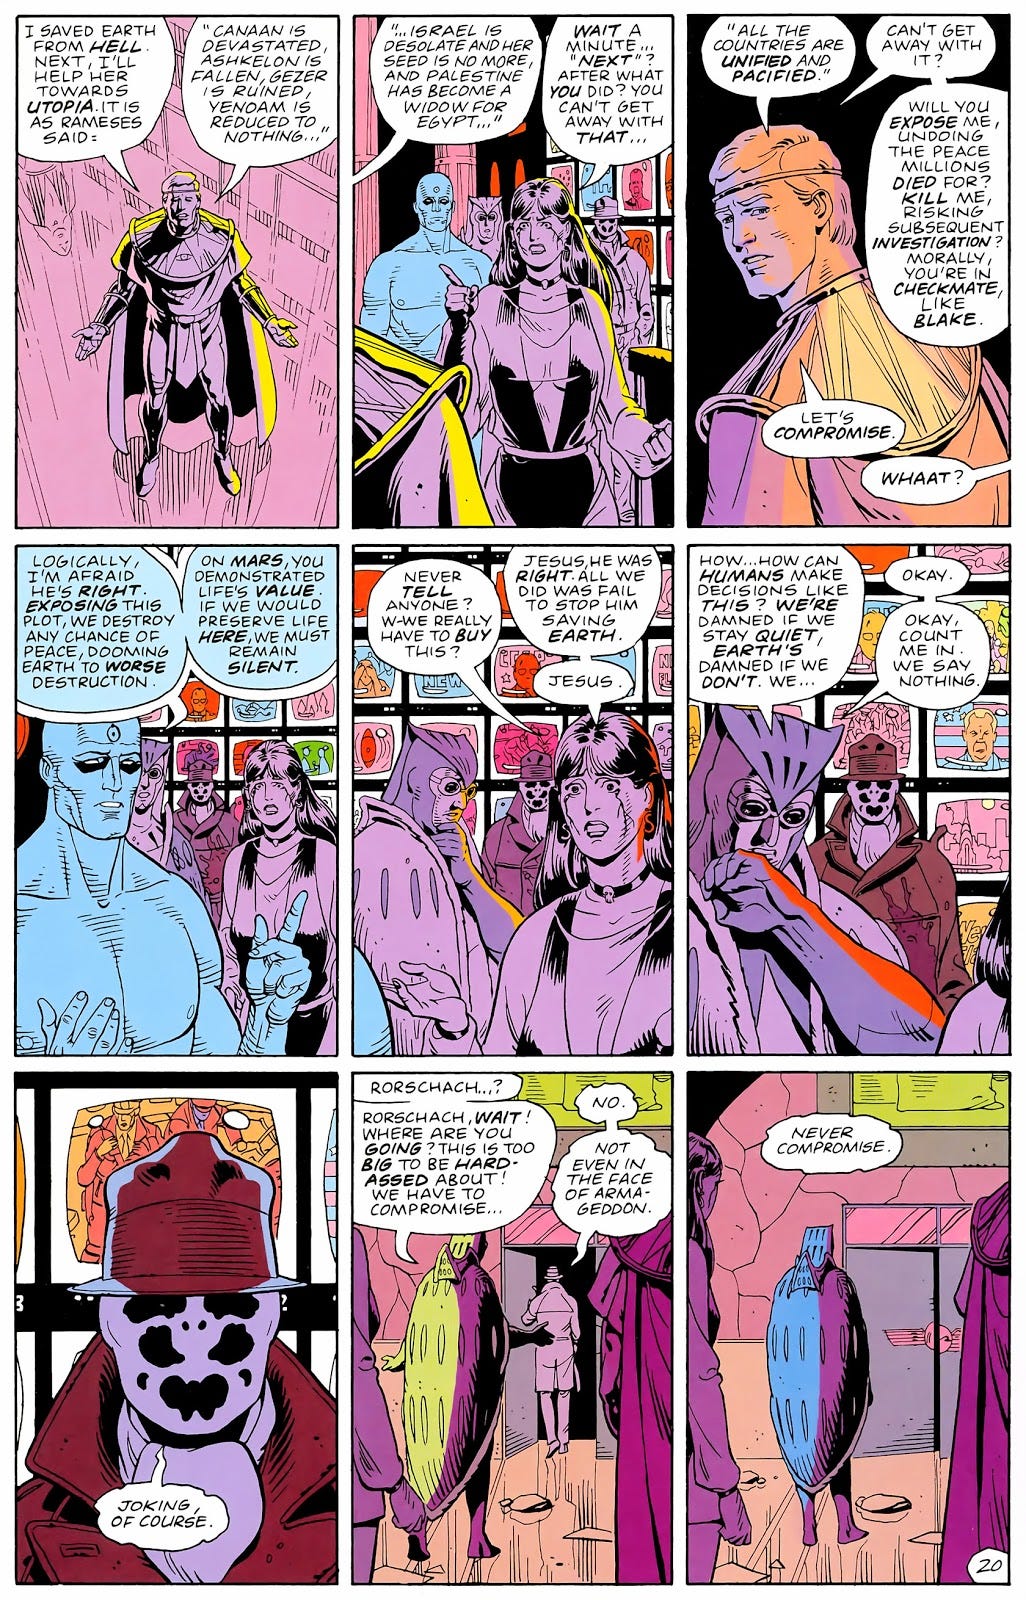 Watchmen and the importance of comics to be seen as literature. | by SETH |  Medium